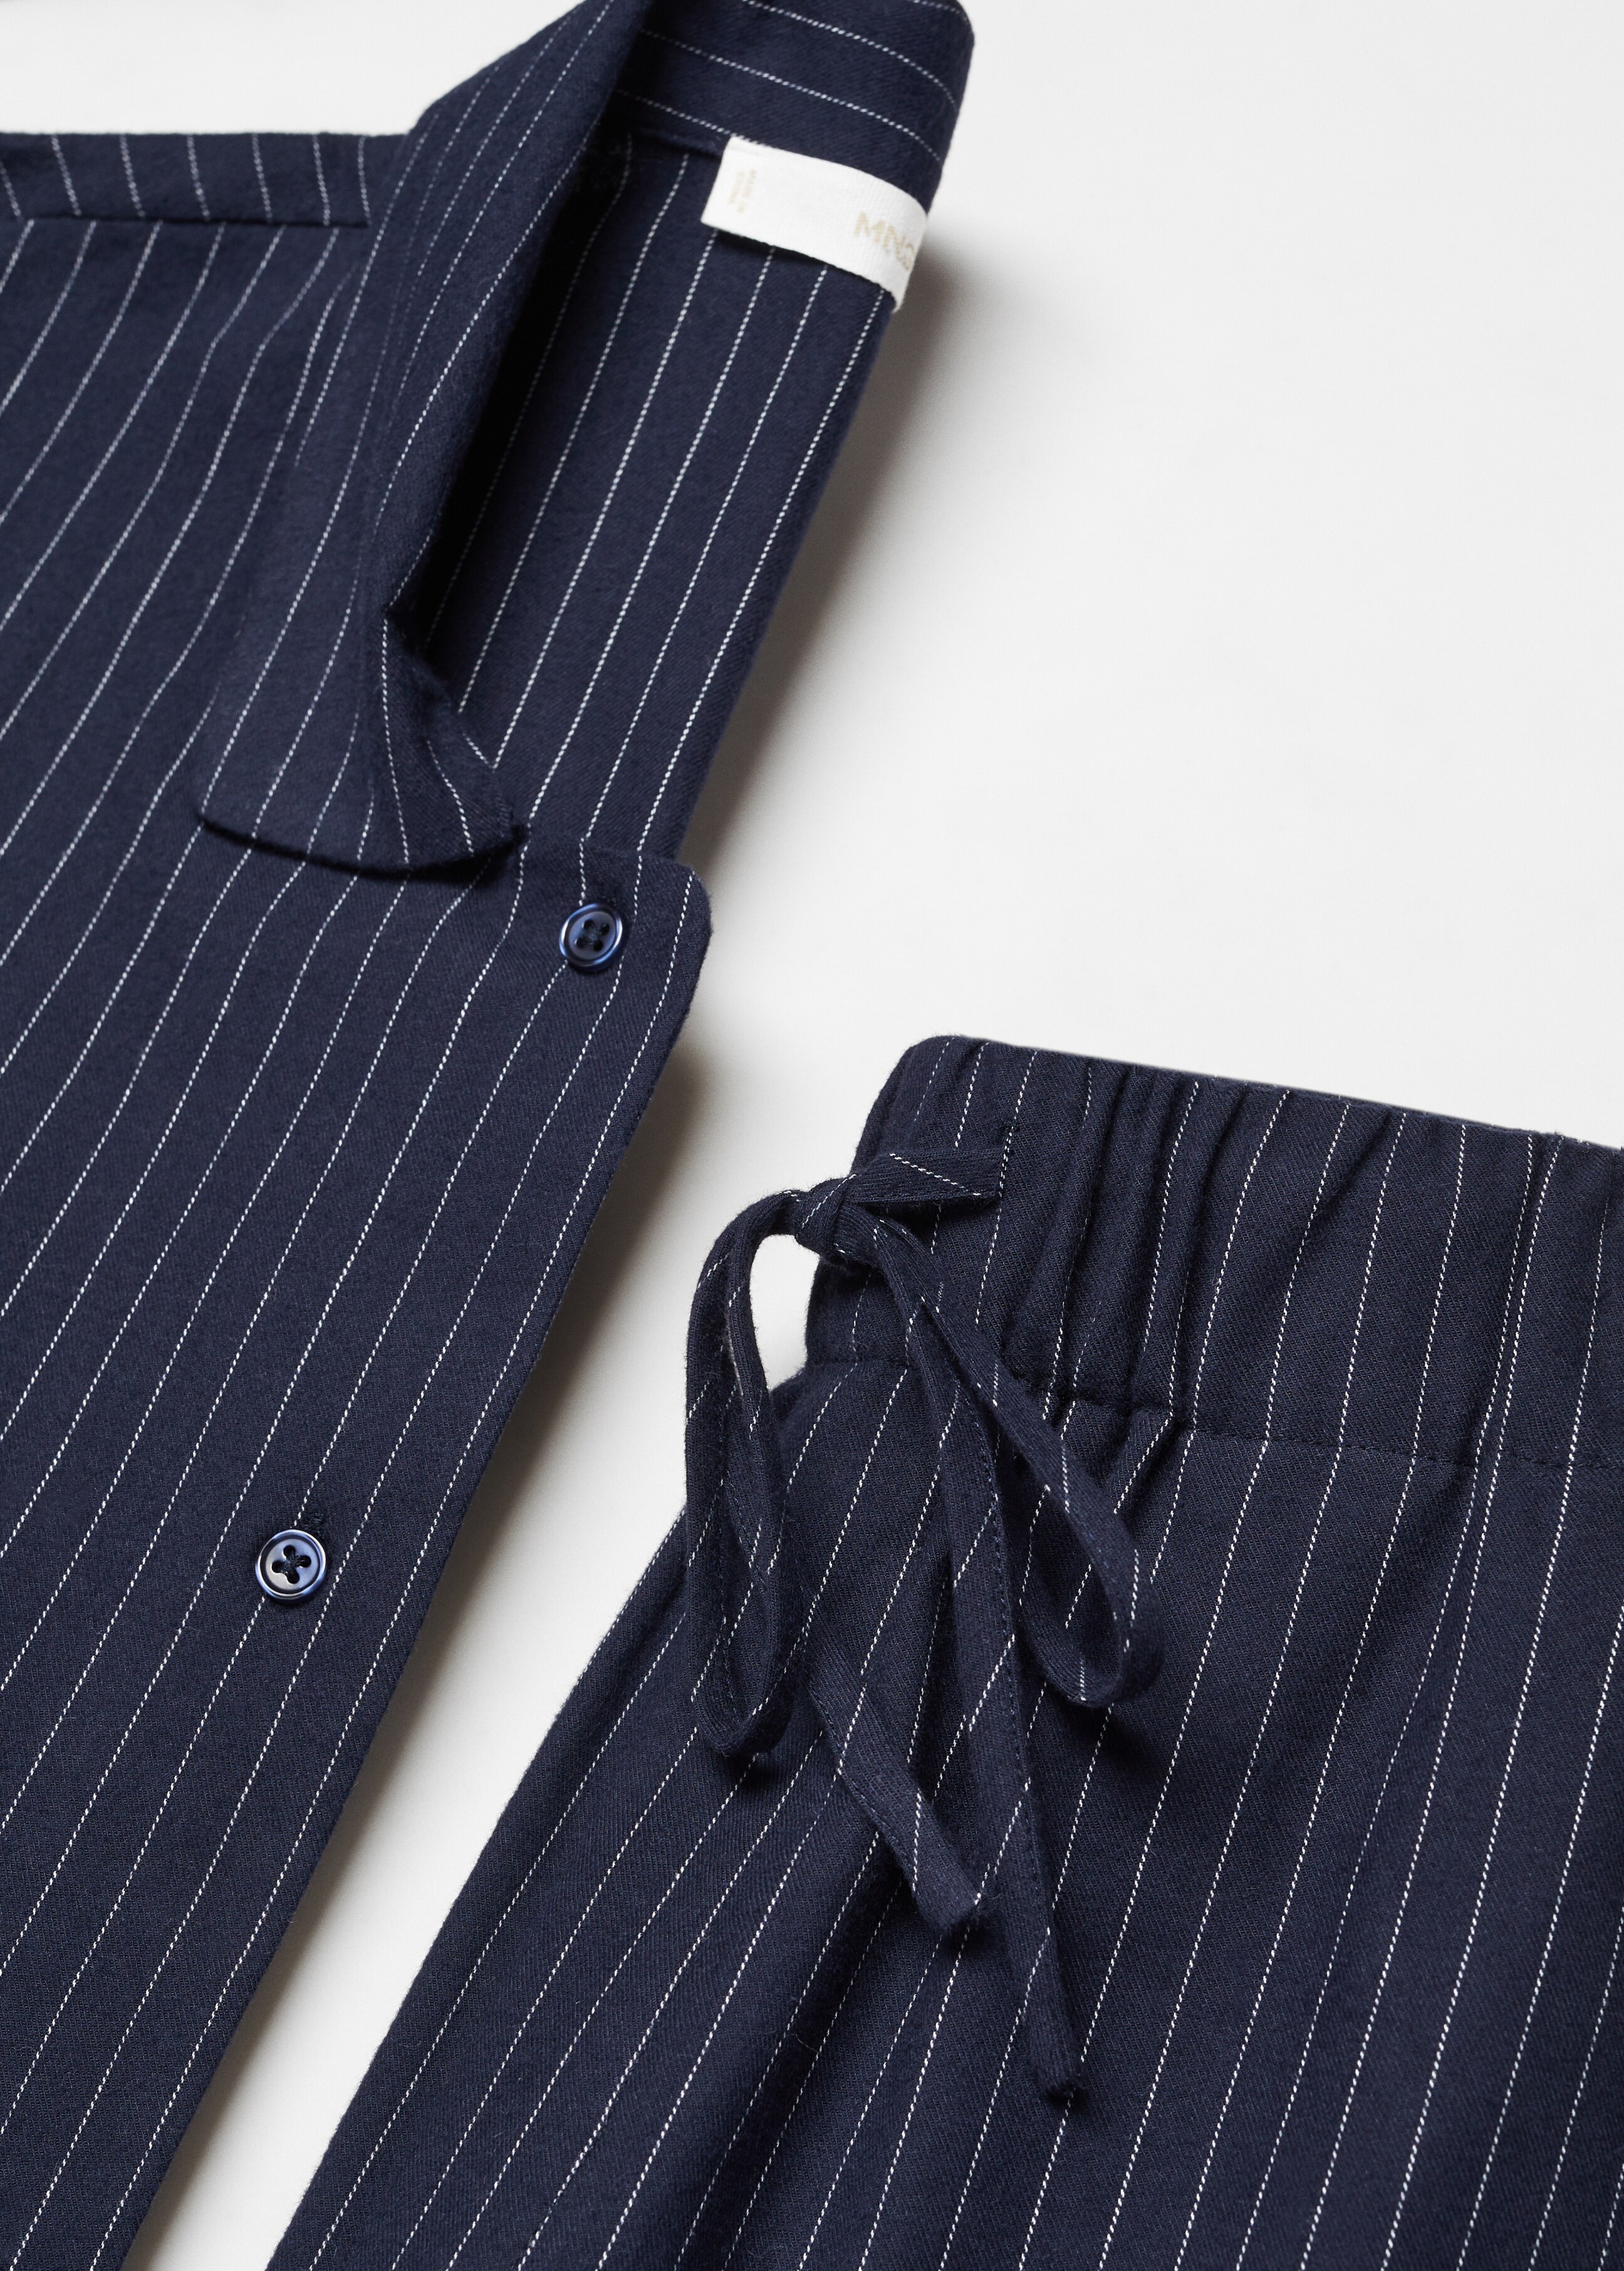 Striped pajama trousers - Details of the article 8